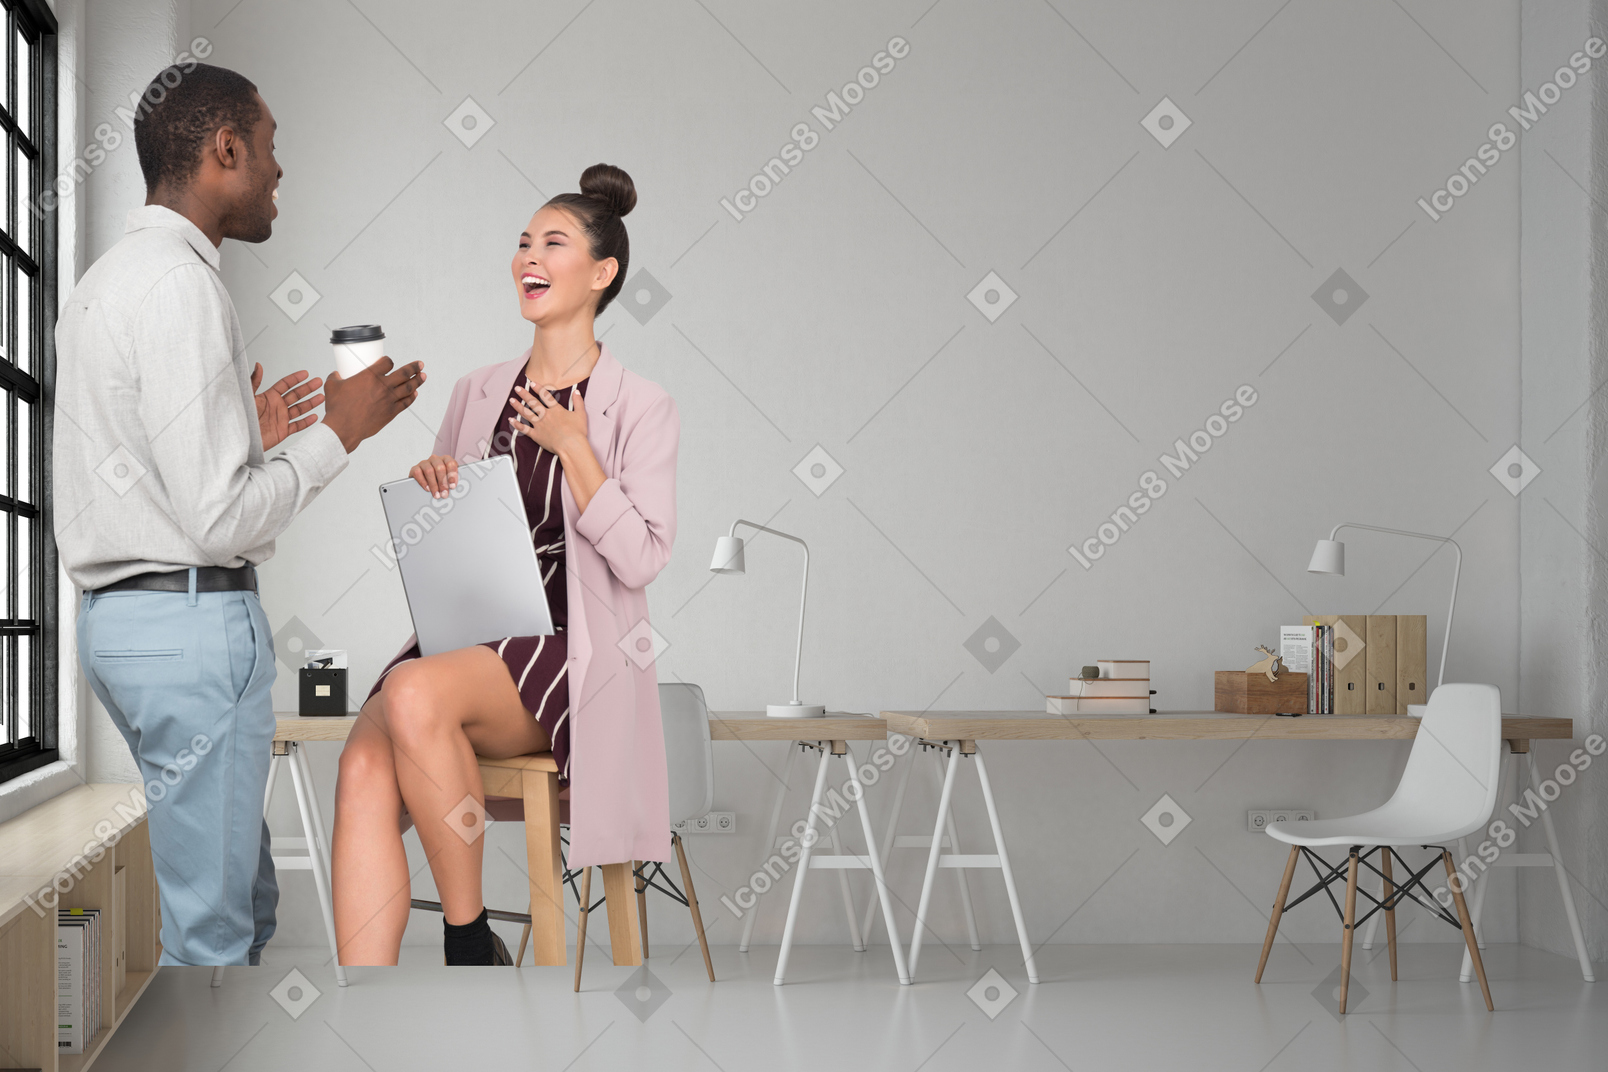 A man talking to a laughing woman